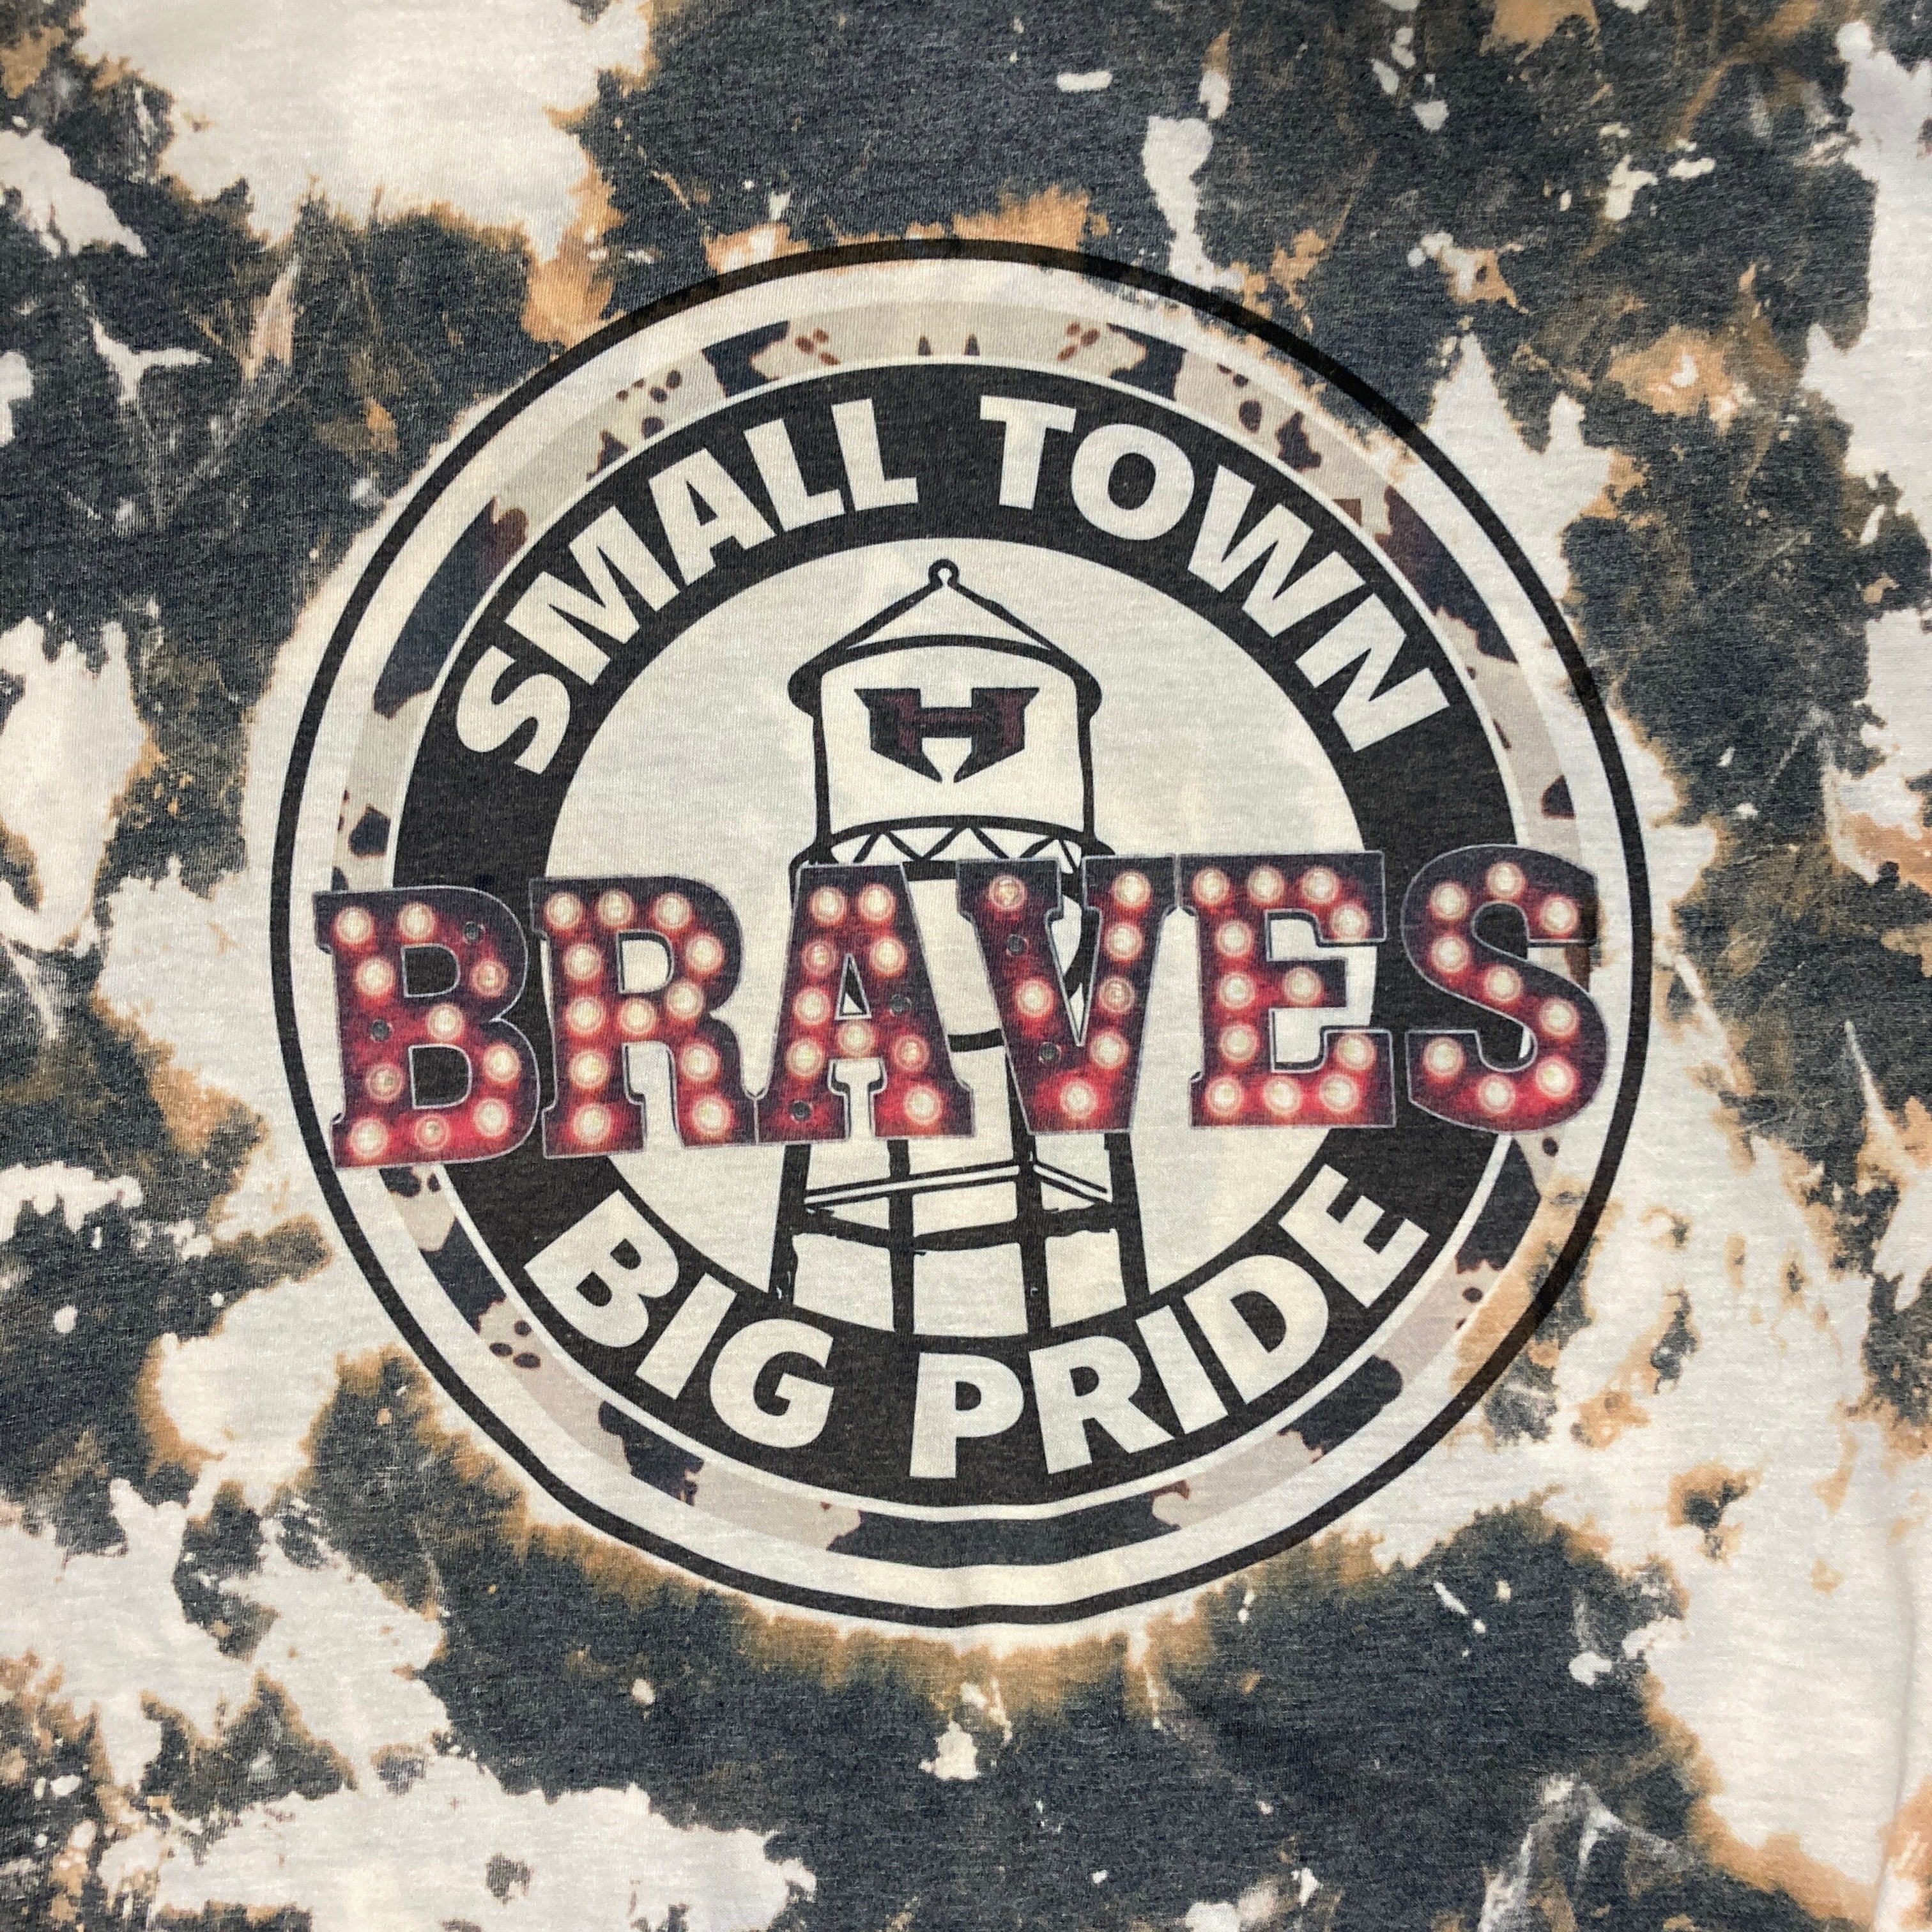 Cowhide Style Heard Braves Small Town Big Pride Shirt Adult 5X Large